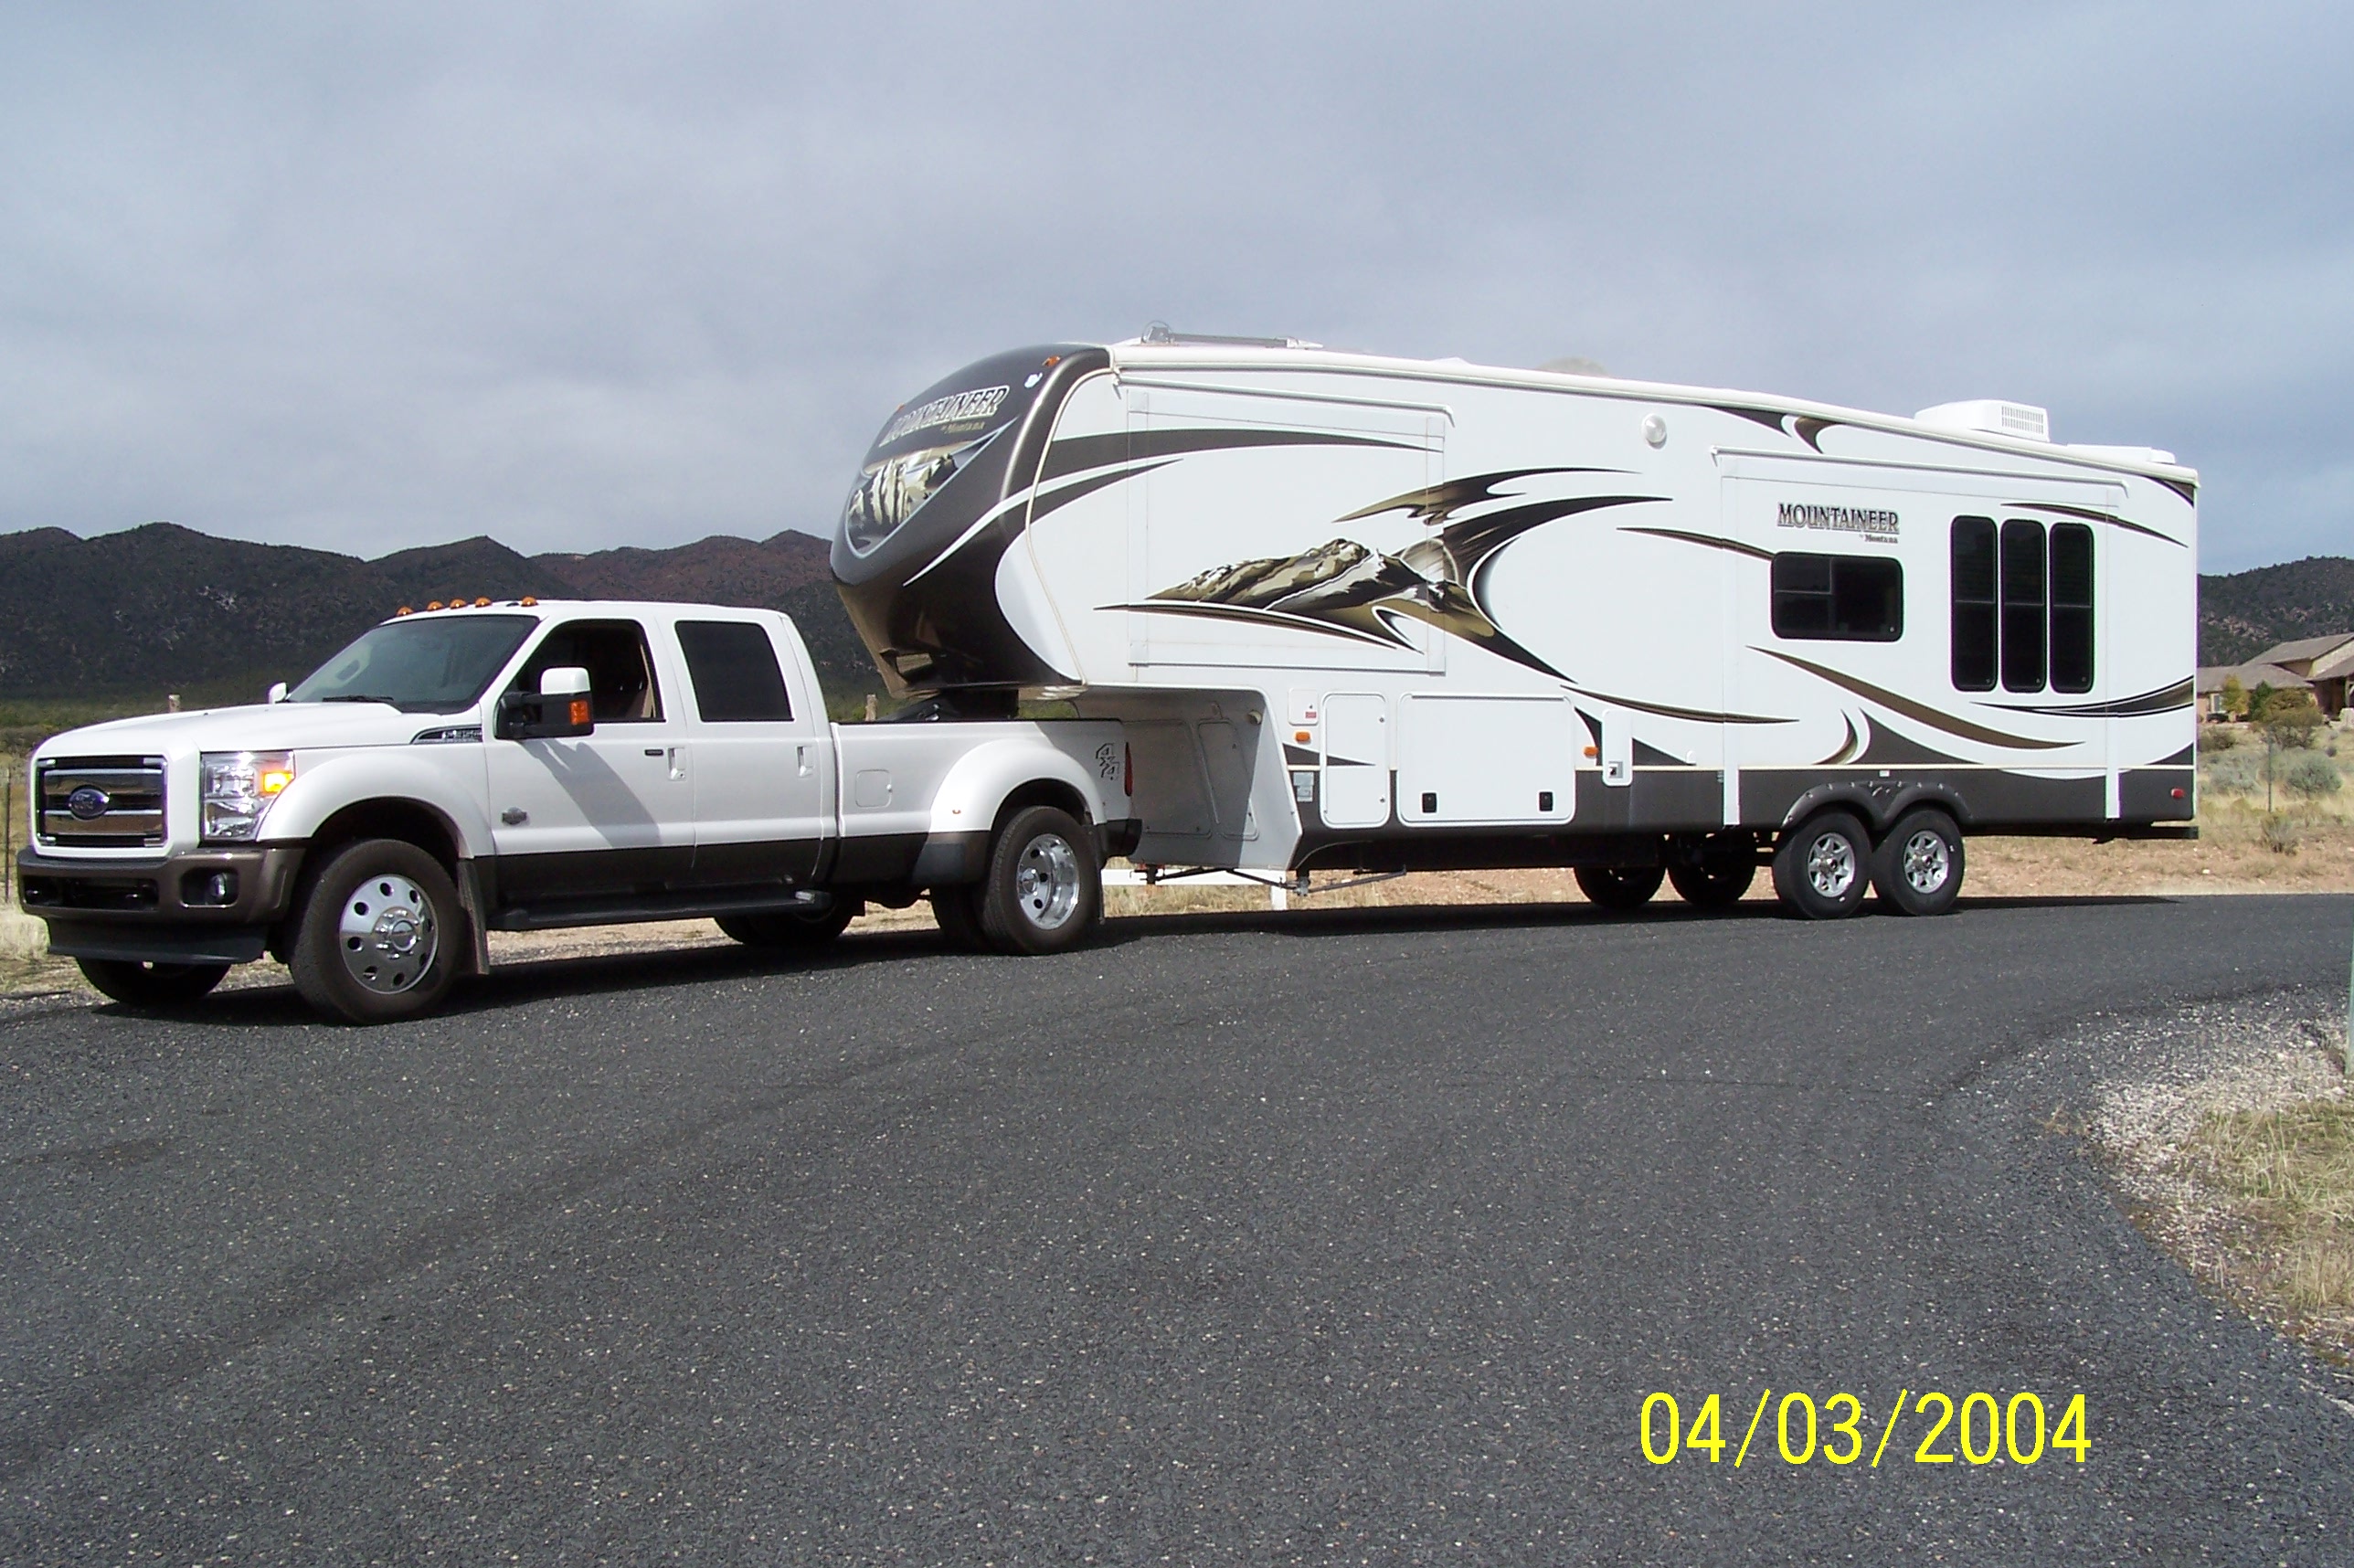 Confused how a F250 can pull a 5th wheel - Ford Truck Enthusiasts Forums